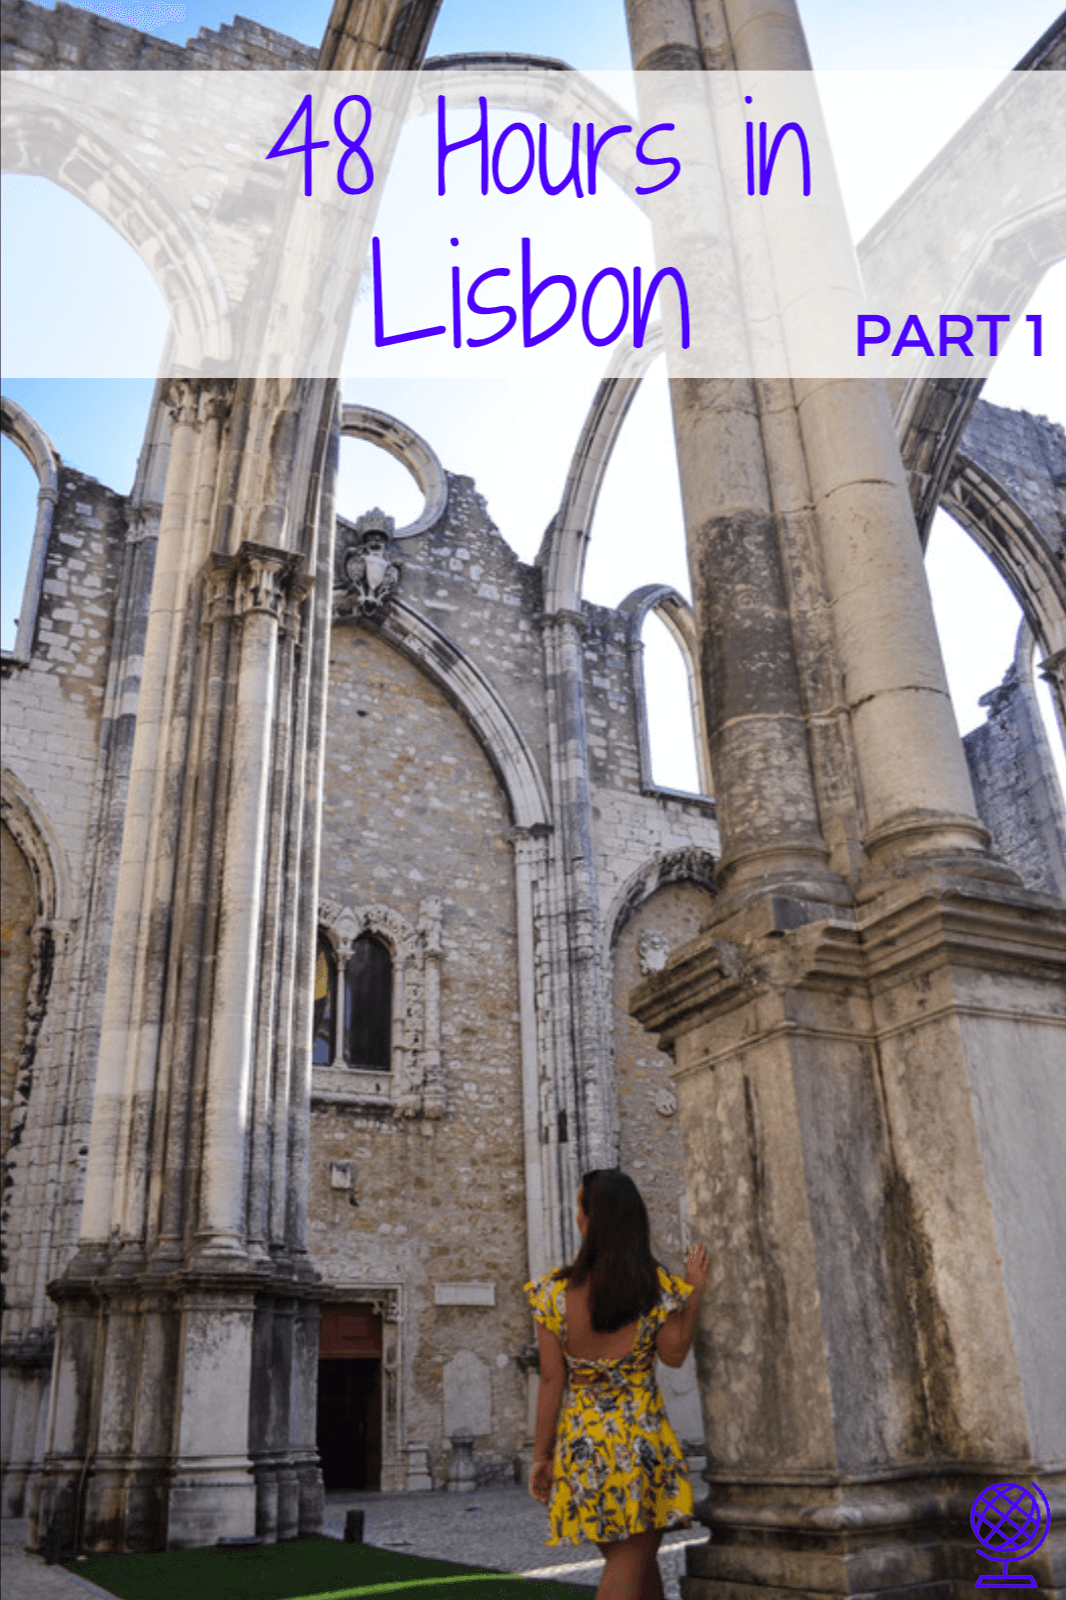 Guide to 48 hours in Lisbon, Portugal - part 1